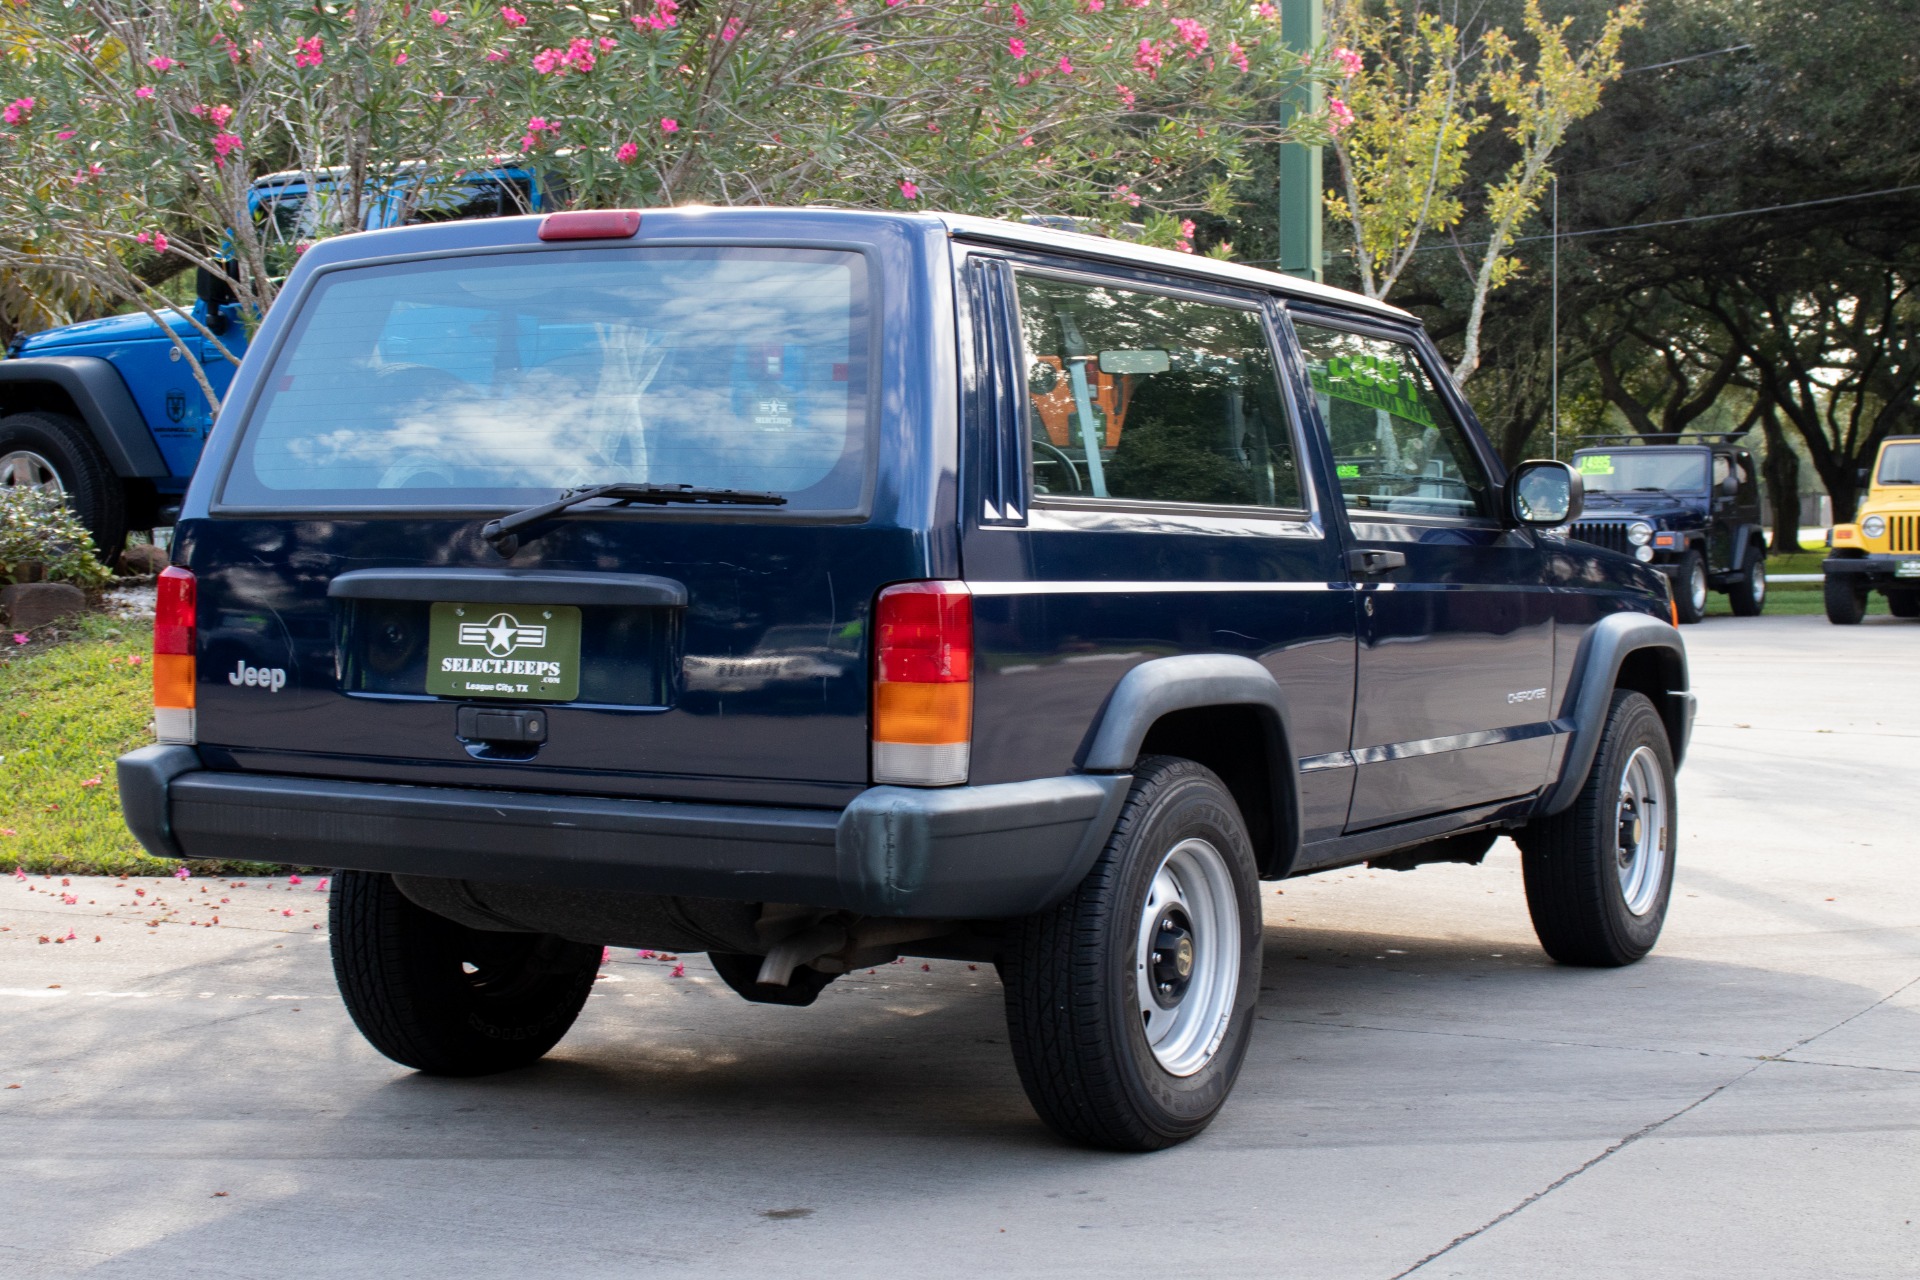 Used-2000-Jeep-Cherokee-2dr-SE